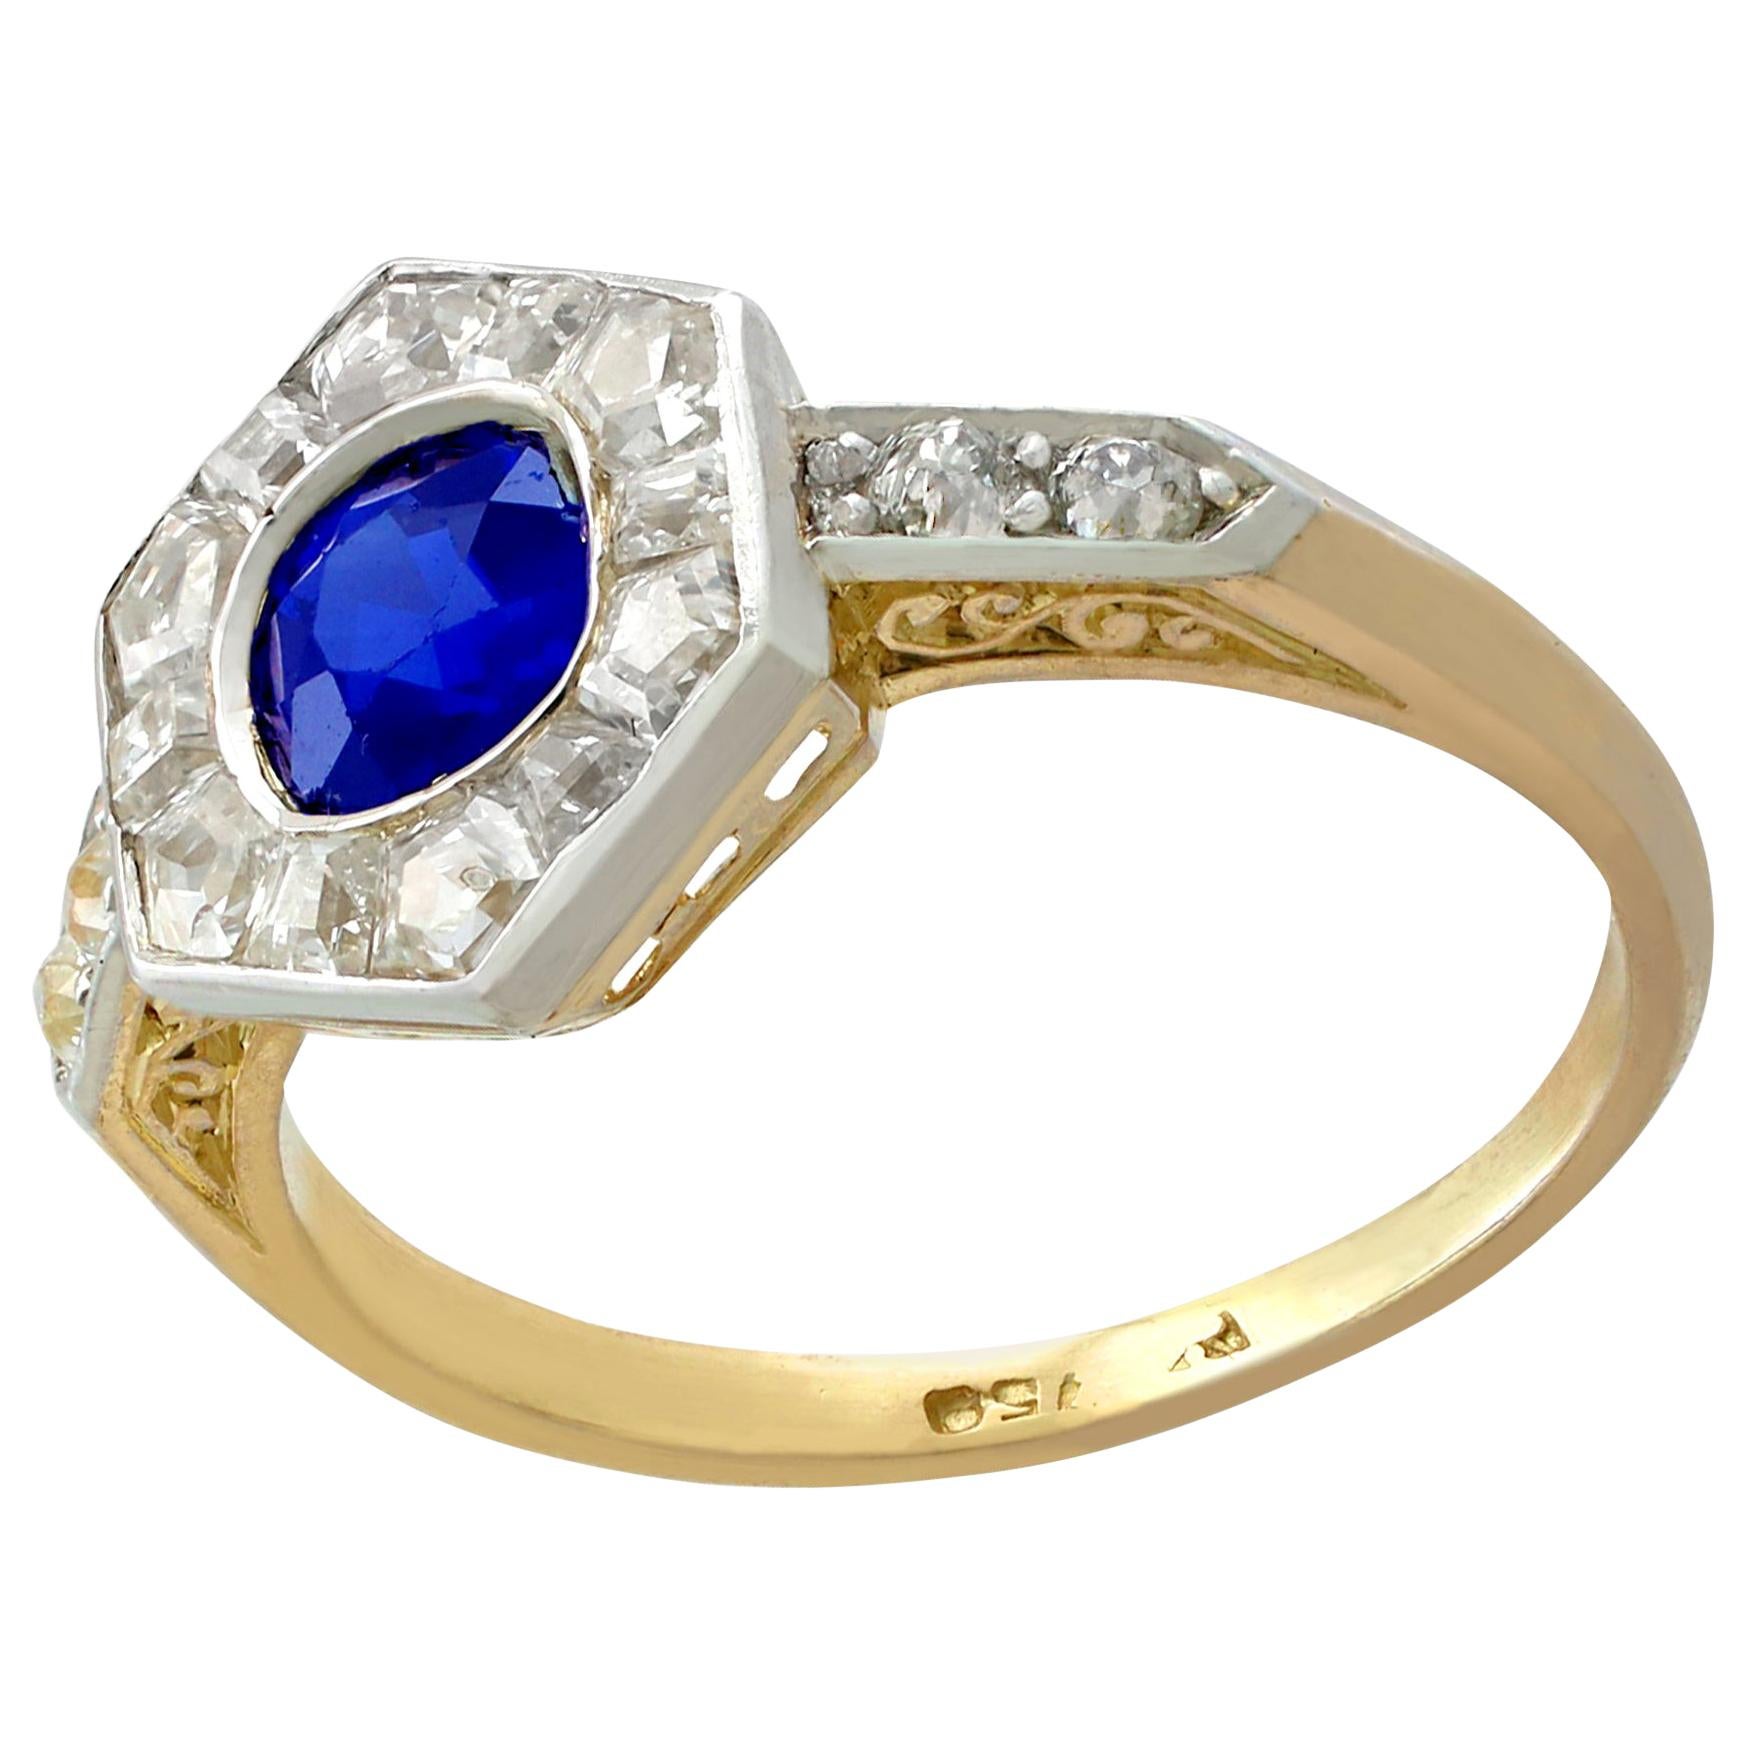 A stunning antique 0.81 carat sapphire and 0.71 carat diamond, 18 karat yellow gold and platinum set dress ring; part of our diverse antique jewellery and estate jewelry collections.

This stunning, fine and impressive antique 1920's blue sapphire